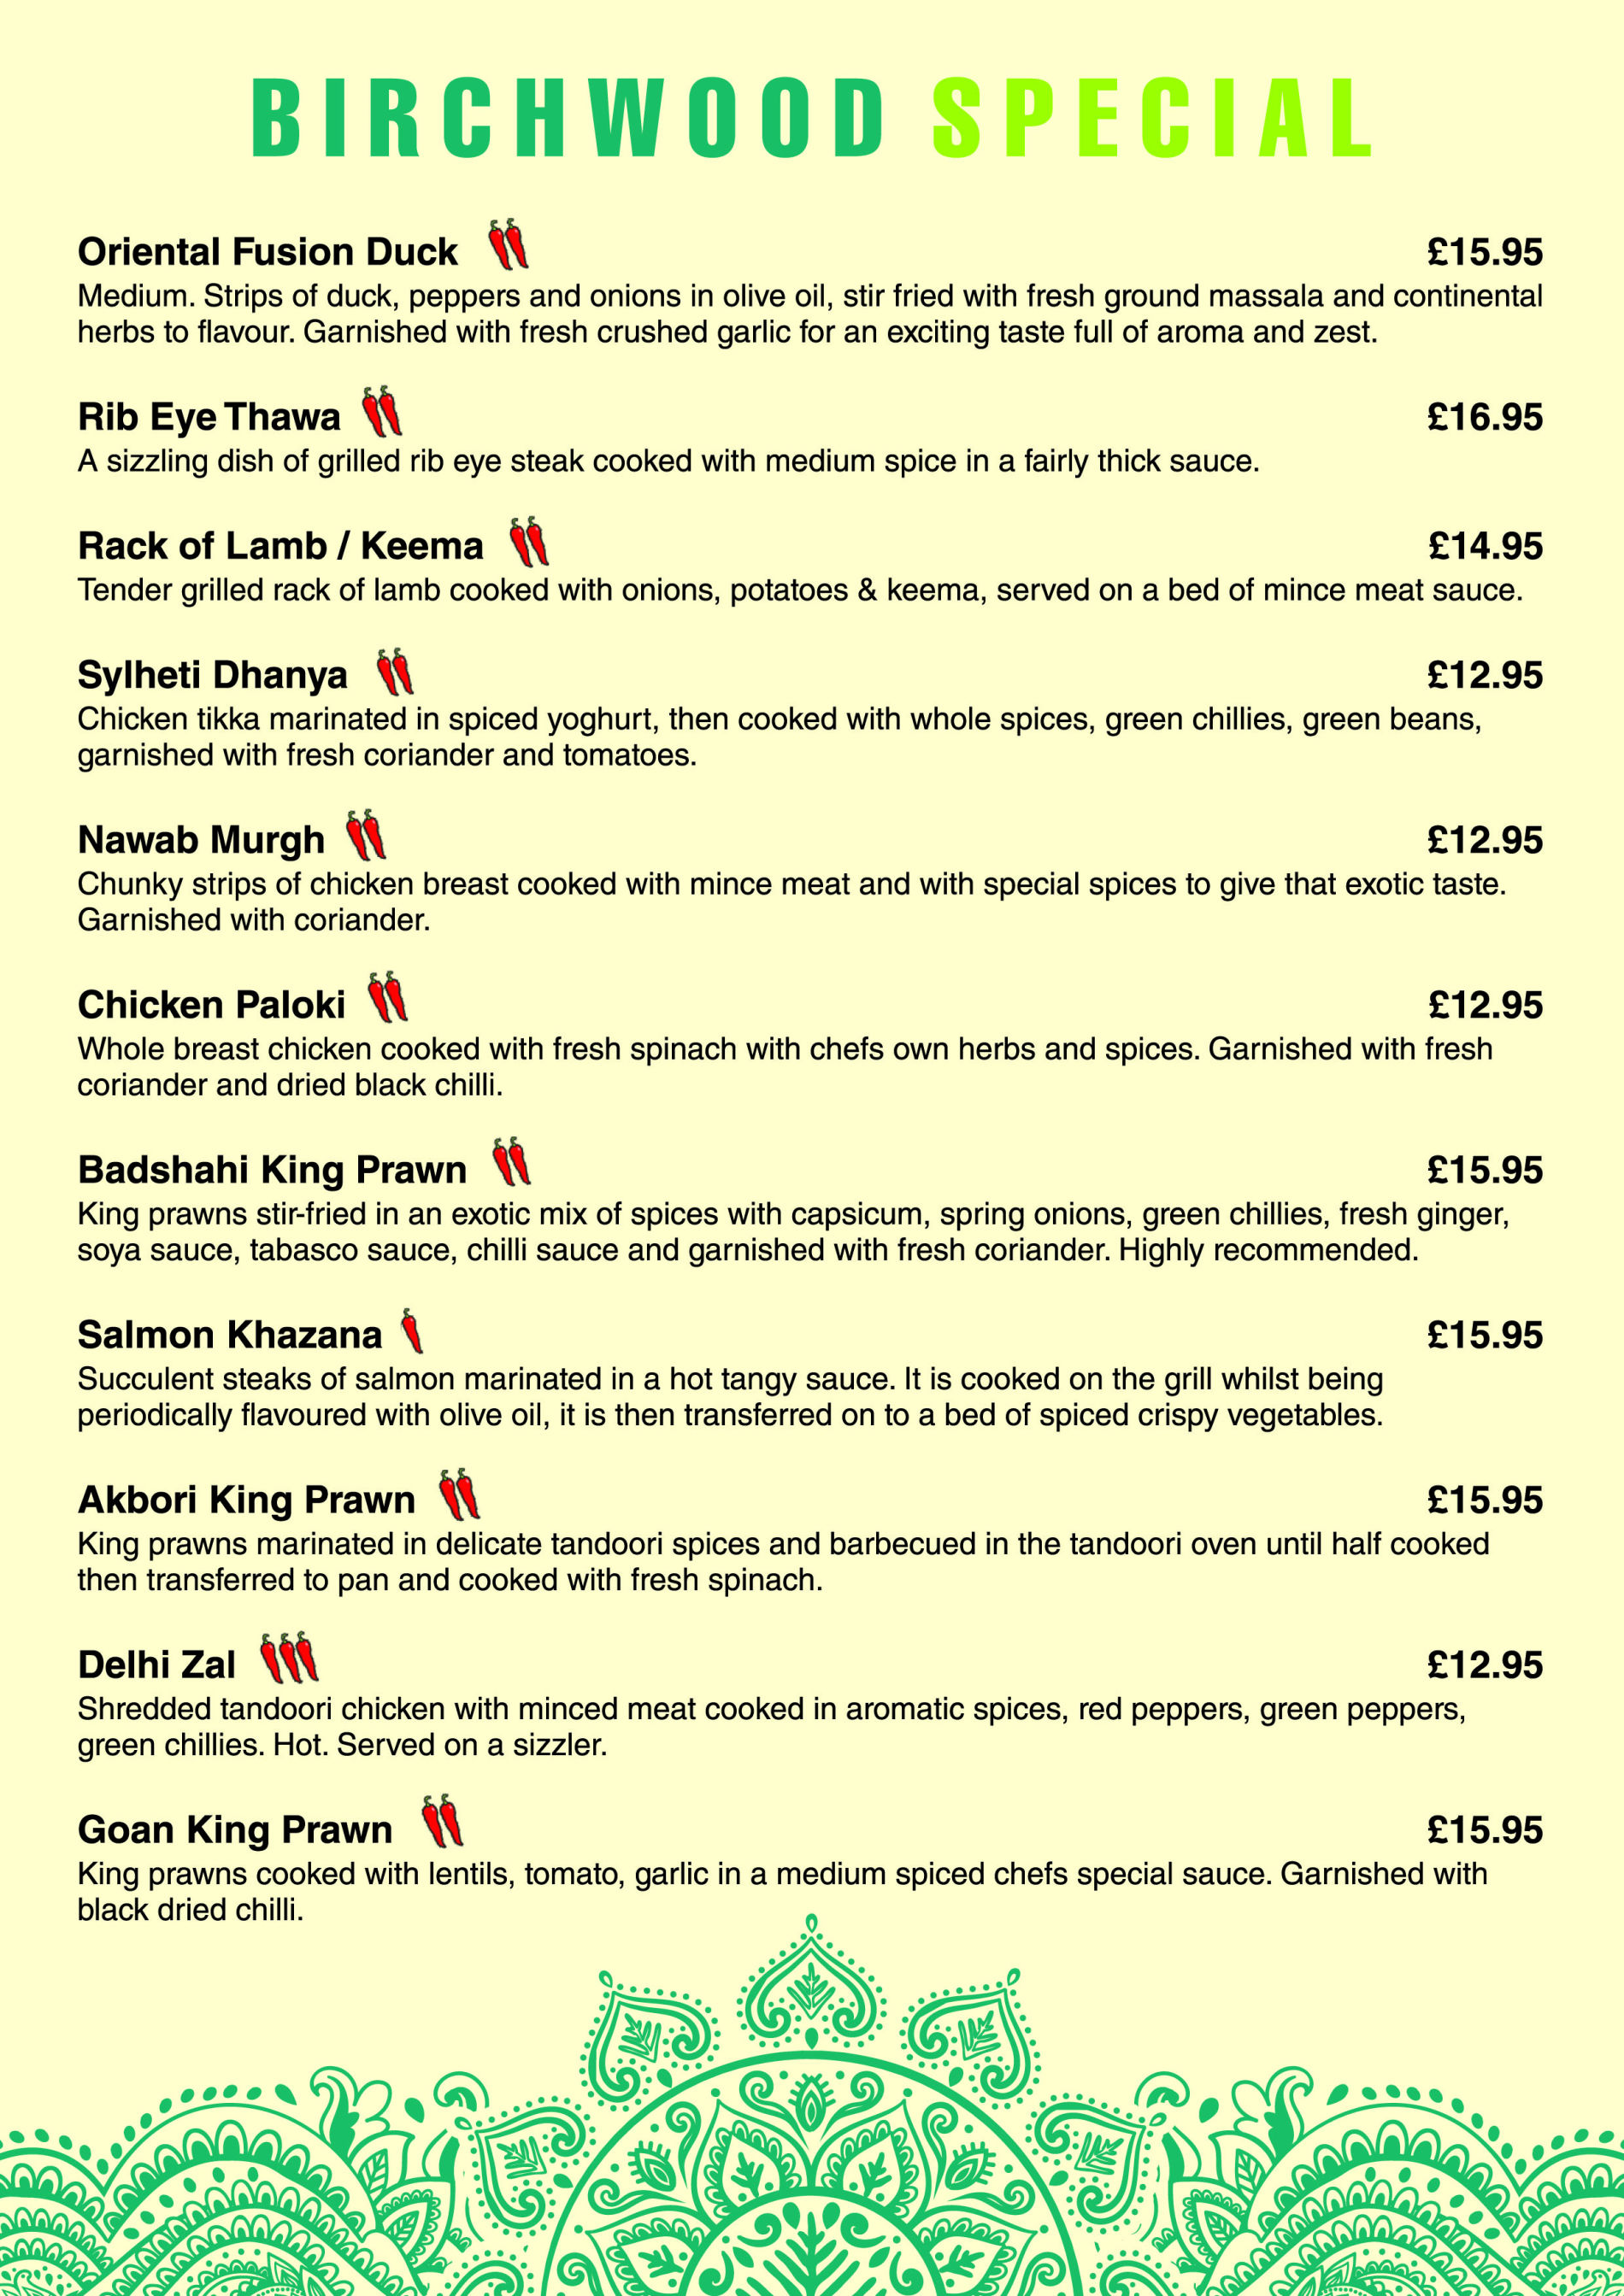 Birchwood Spice Special Dishes